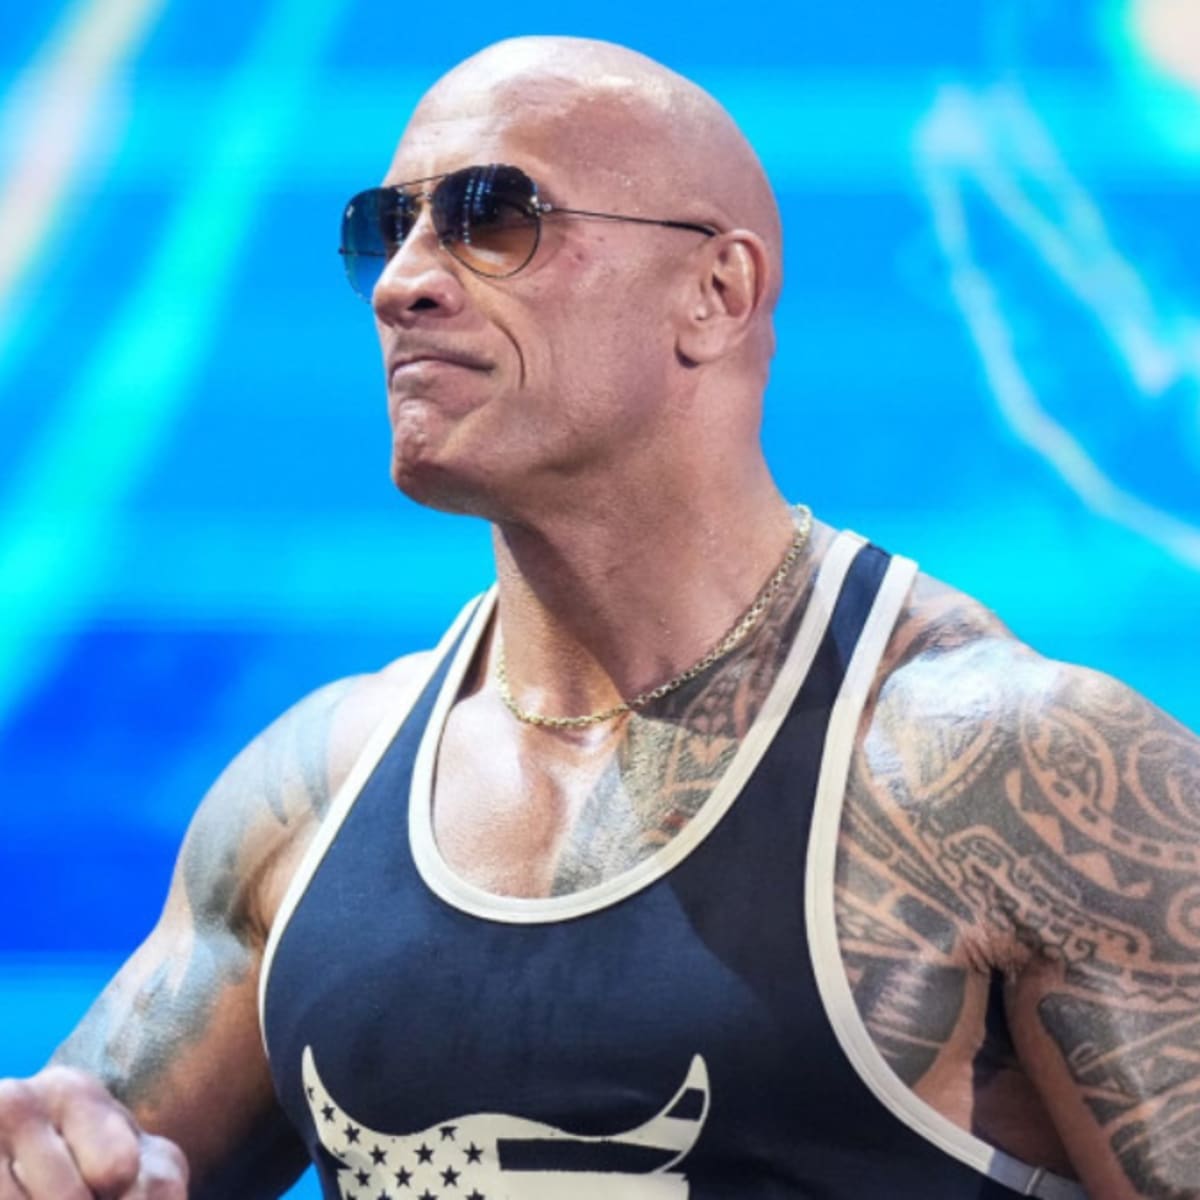 WrestleMania 40 Kickoff: What did The Rock say to Triple H that